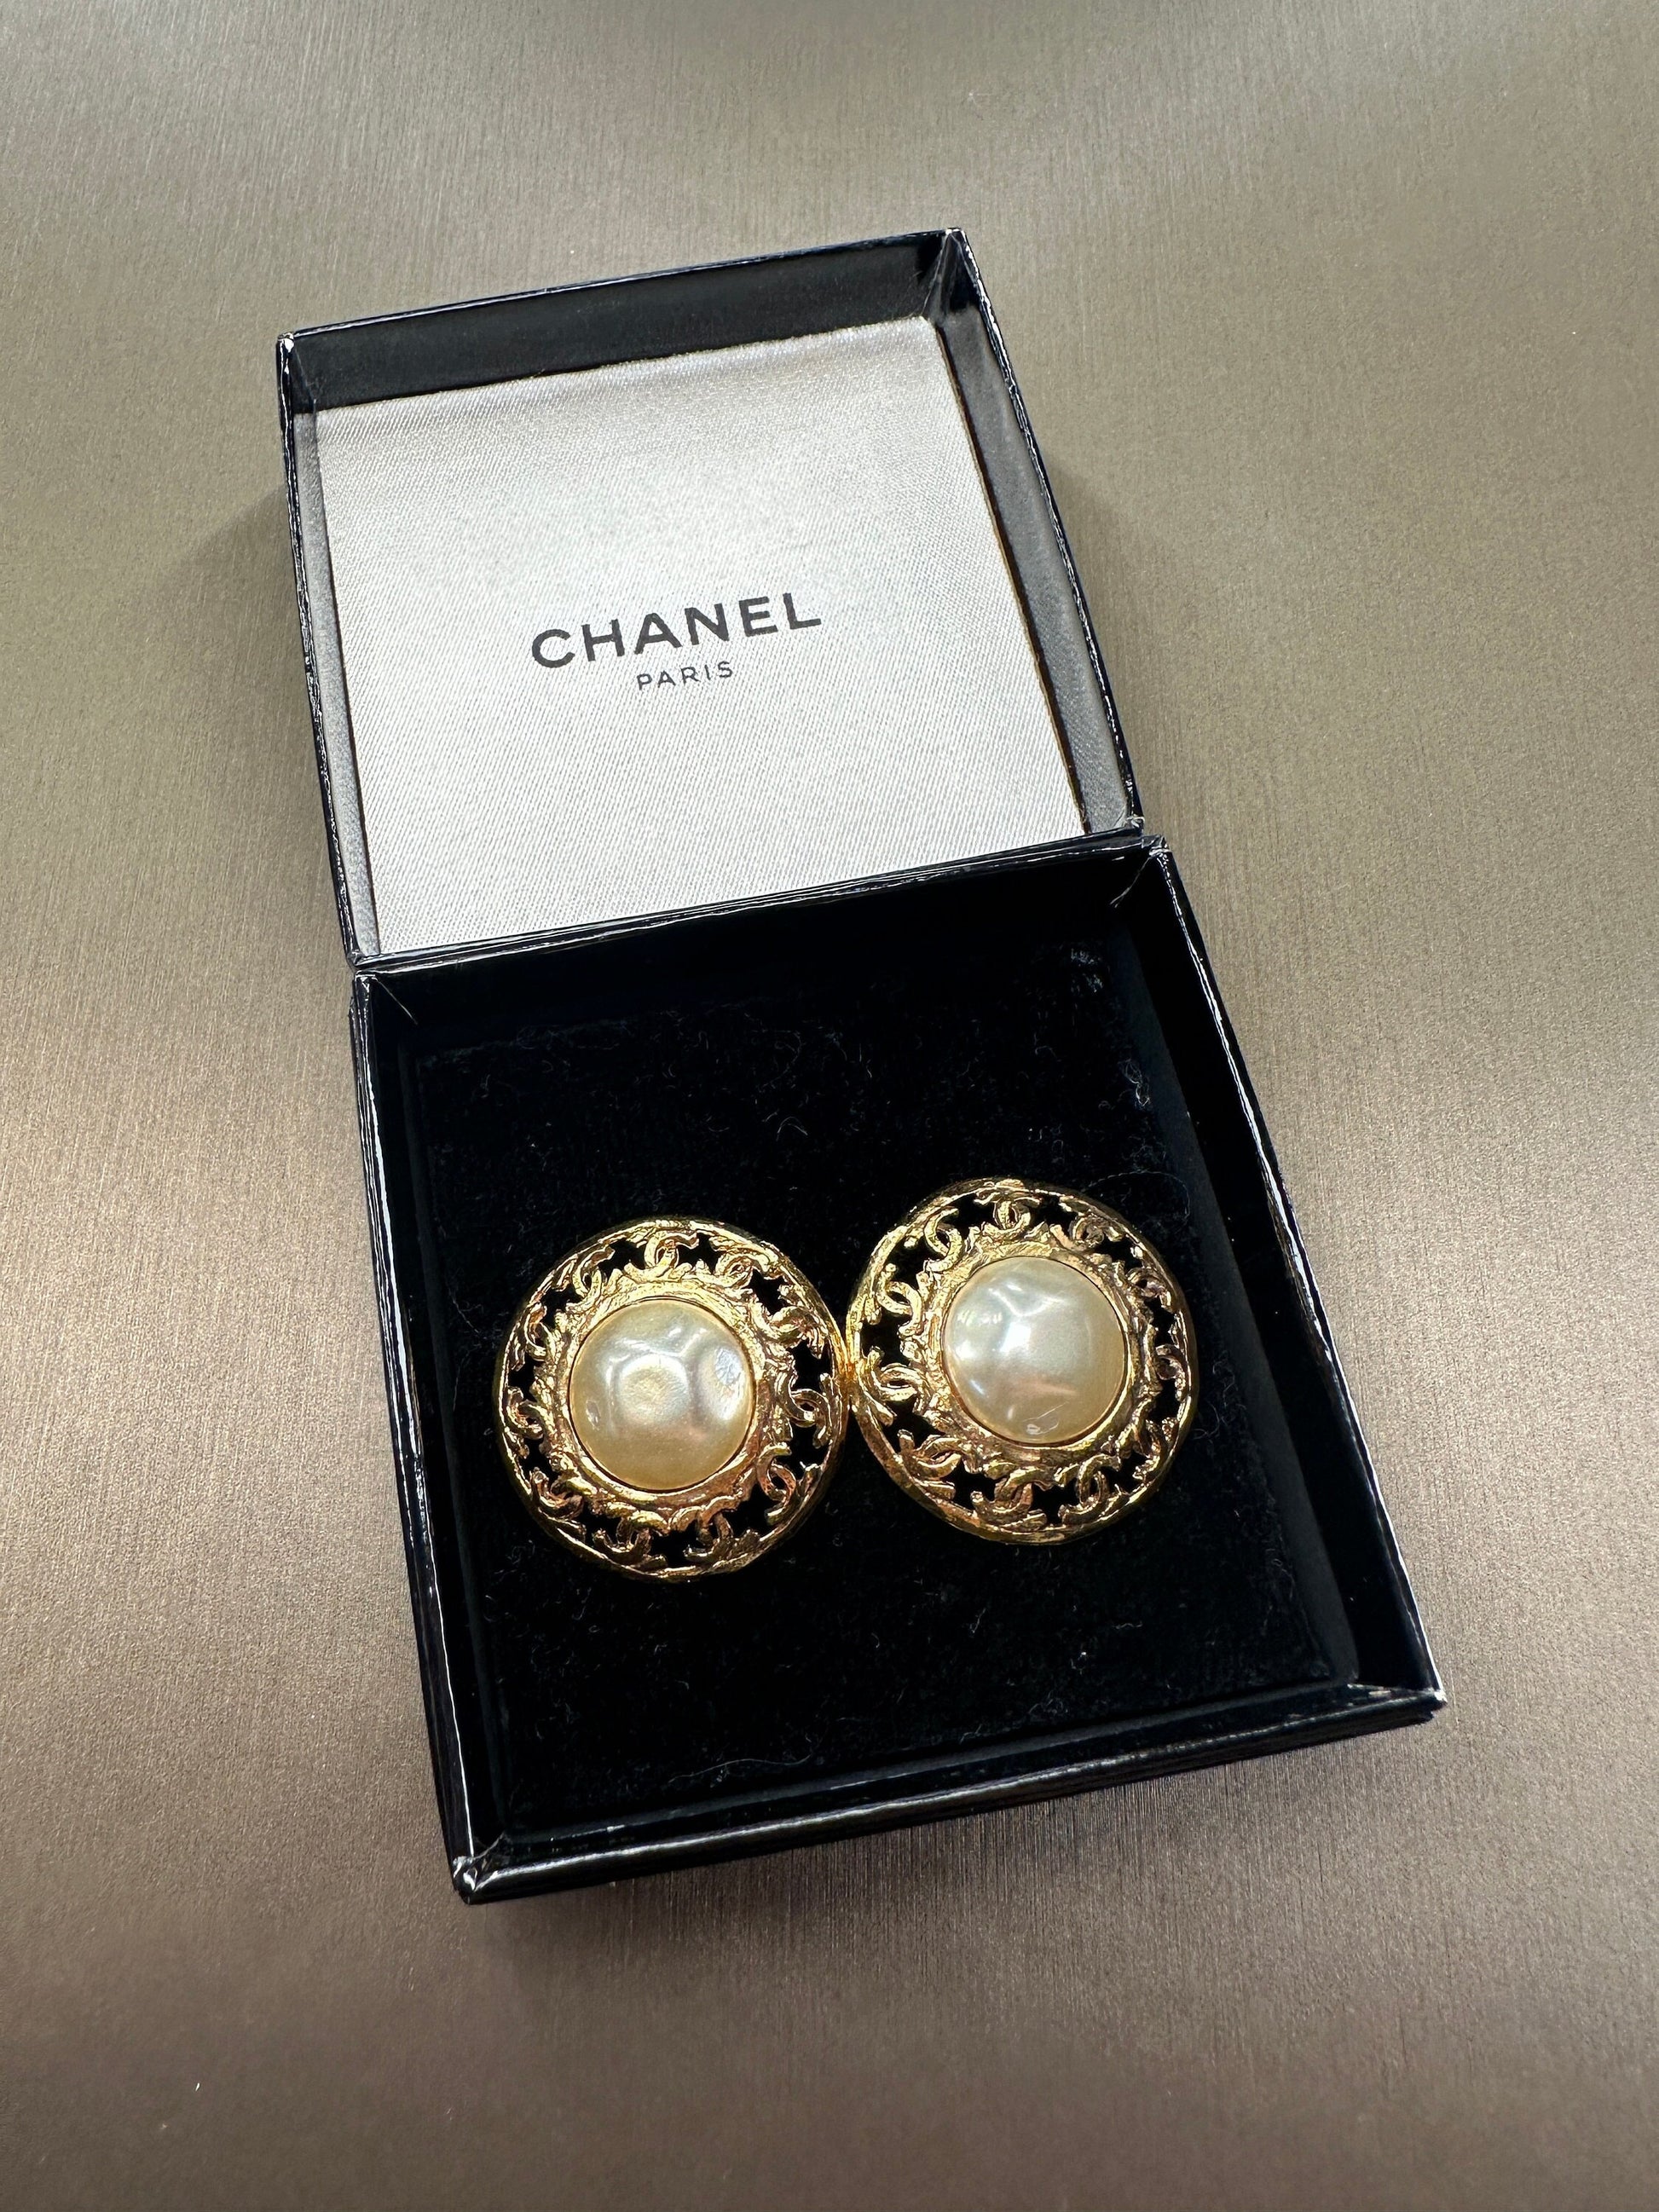 CHANEL VINTAGE 100% Authentic Genuine Faux Pearl Clip On Logo Earrings in Gold, CC Logos All around, with Box, 1984-1992, Made in France